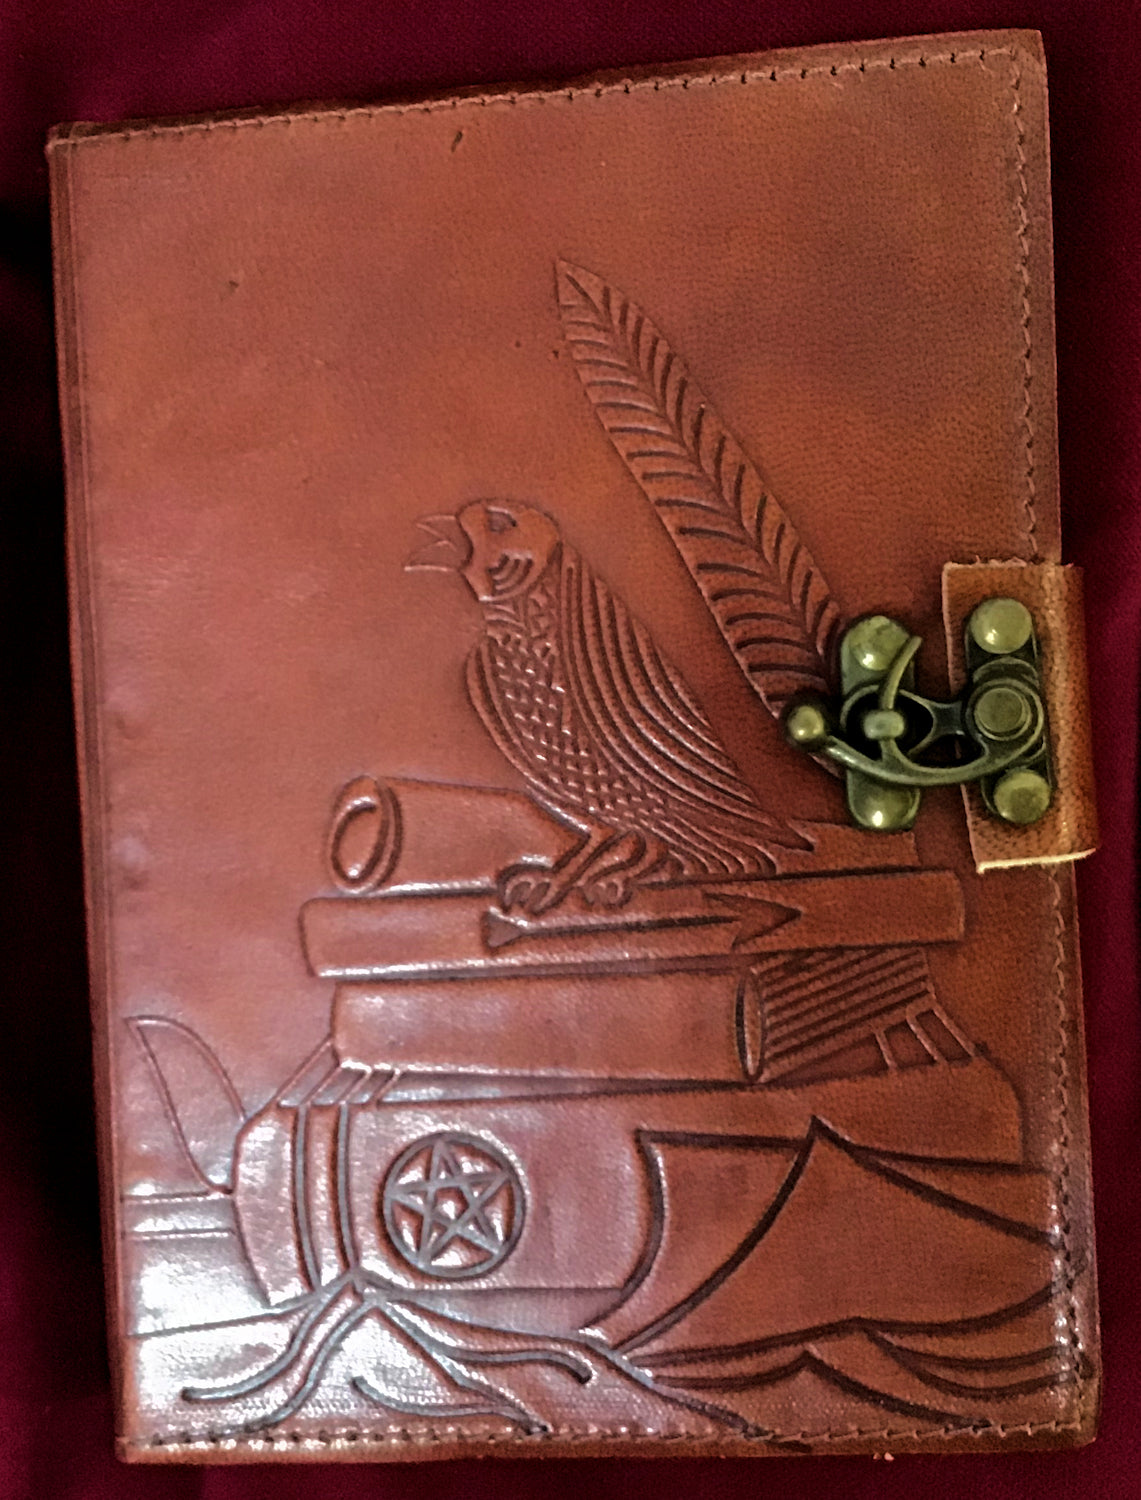 Blank Journal Leather Cover: Raven on Books  5" x 7"